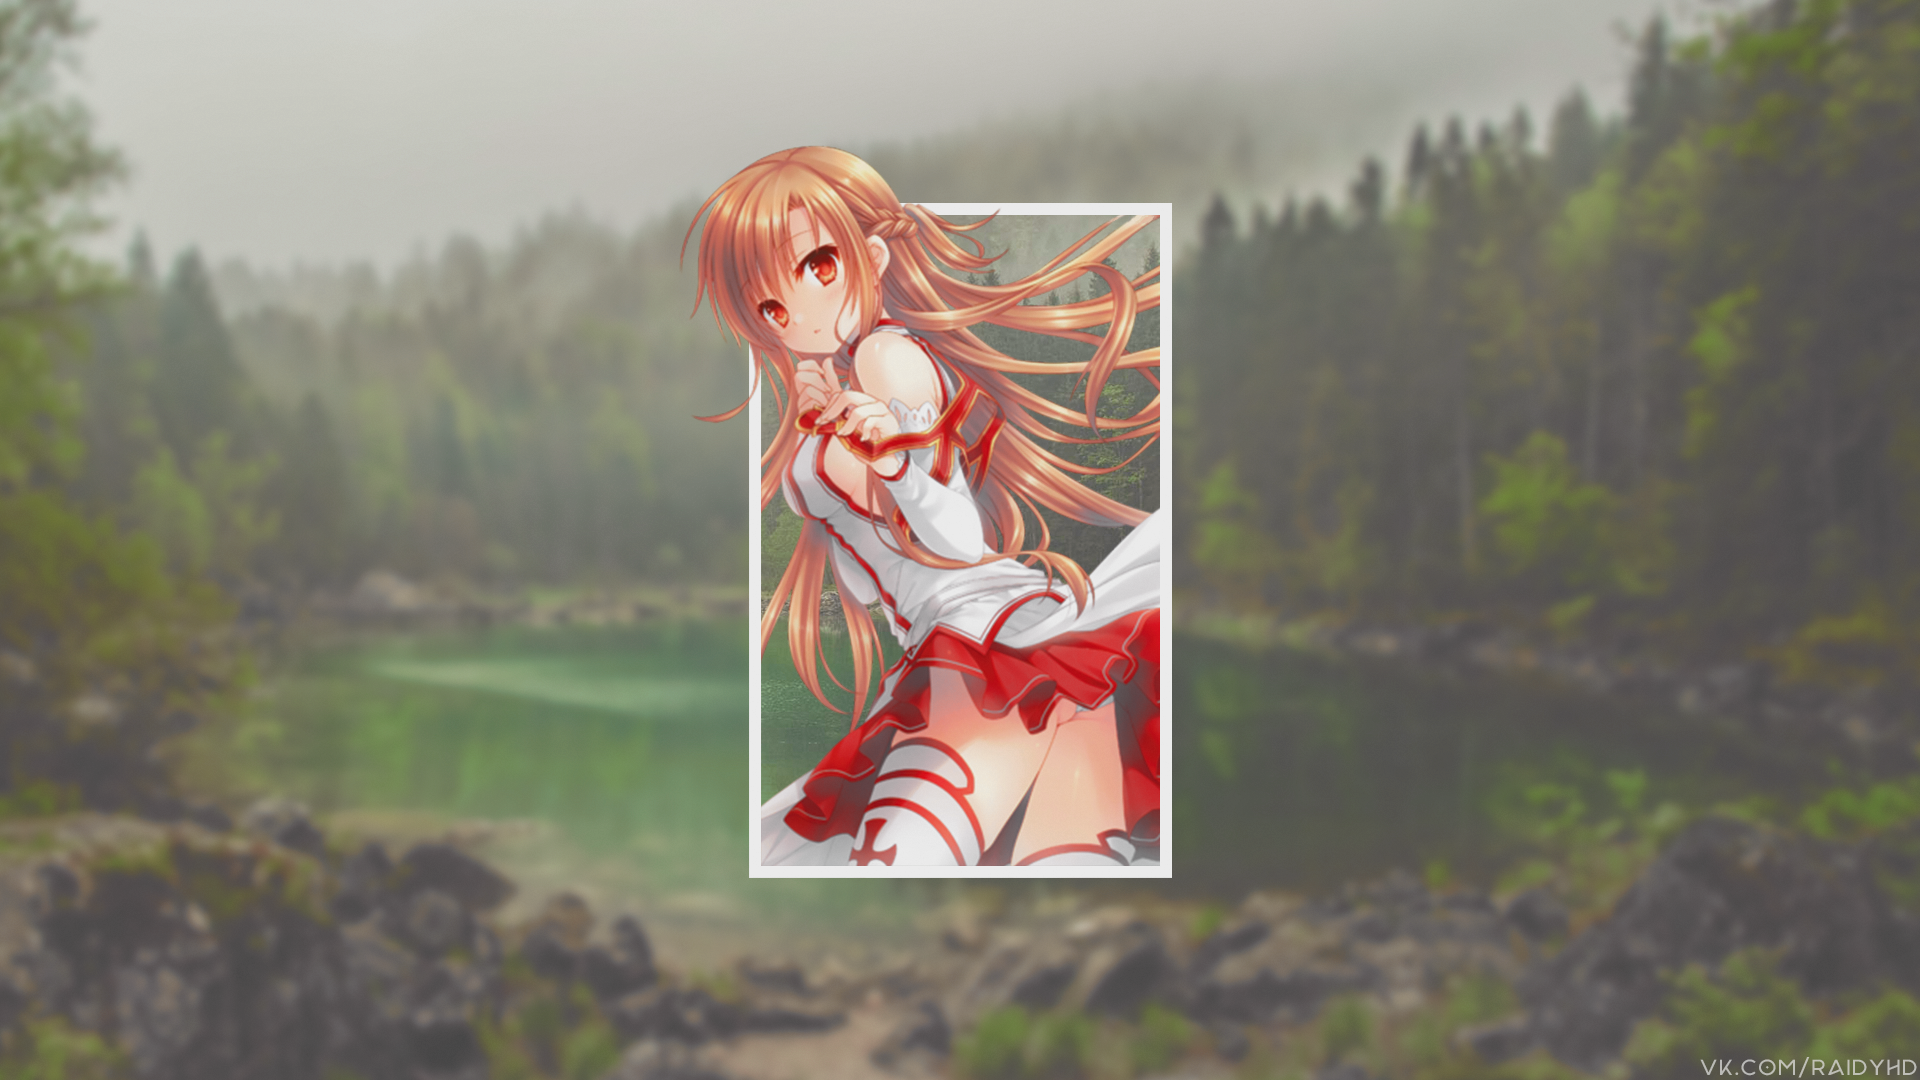 Anime 1920x1080 anime anime girls picture-in-picture Sword Art Online Yuuki Asuna (Sword Art Online) redhead red eyes ass cheeks trees